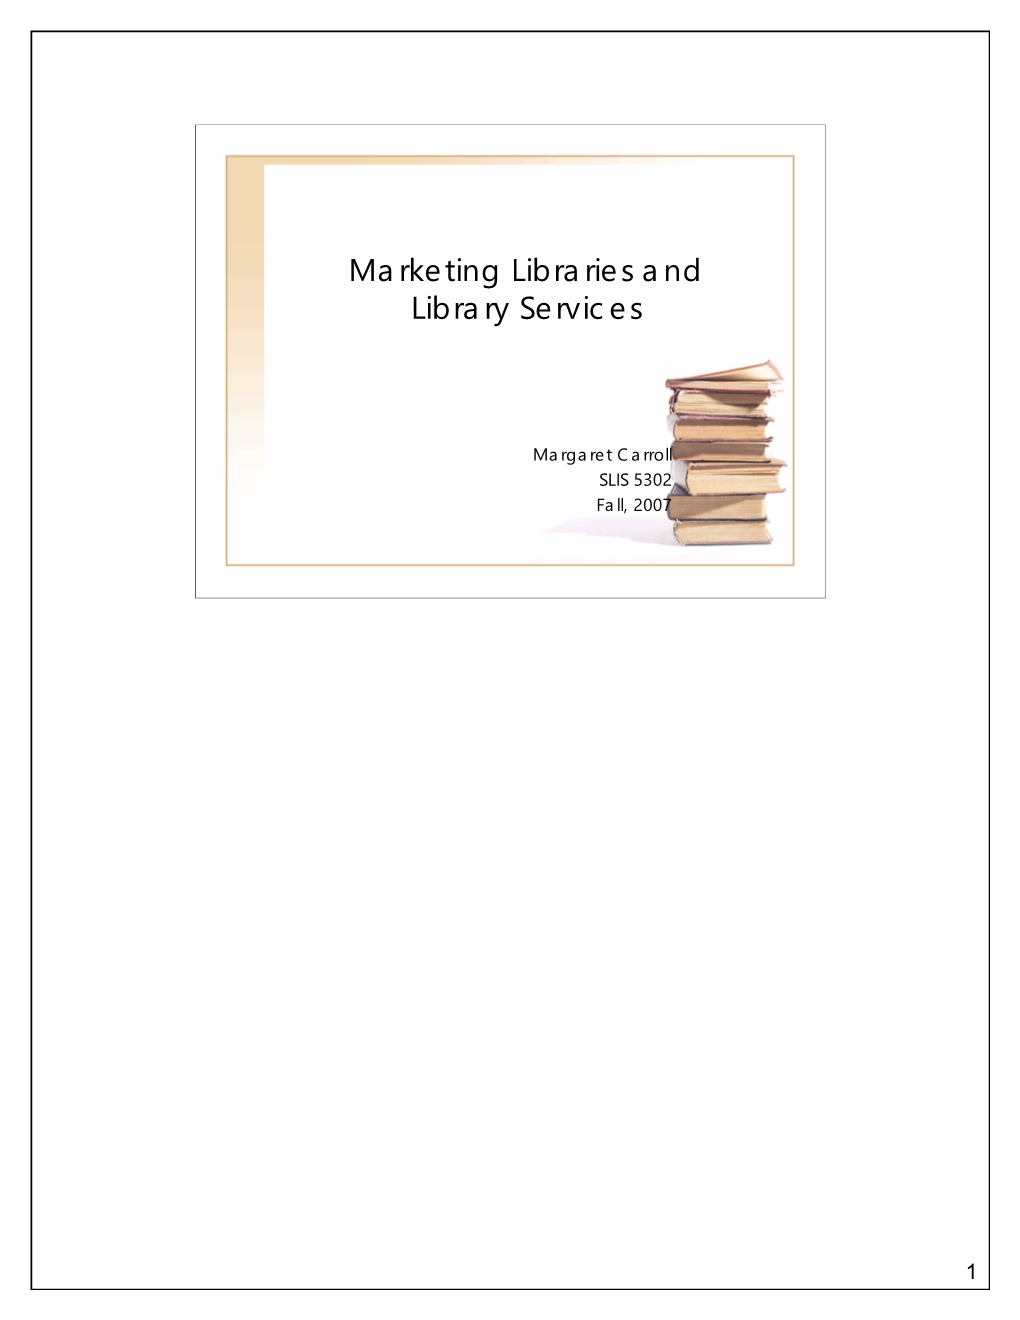 Marketing Libraries and Library Services